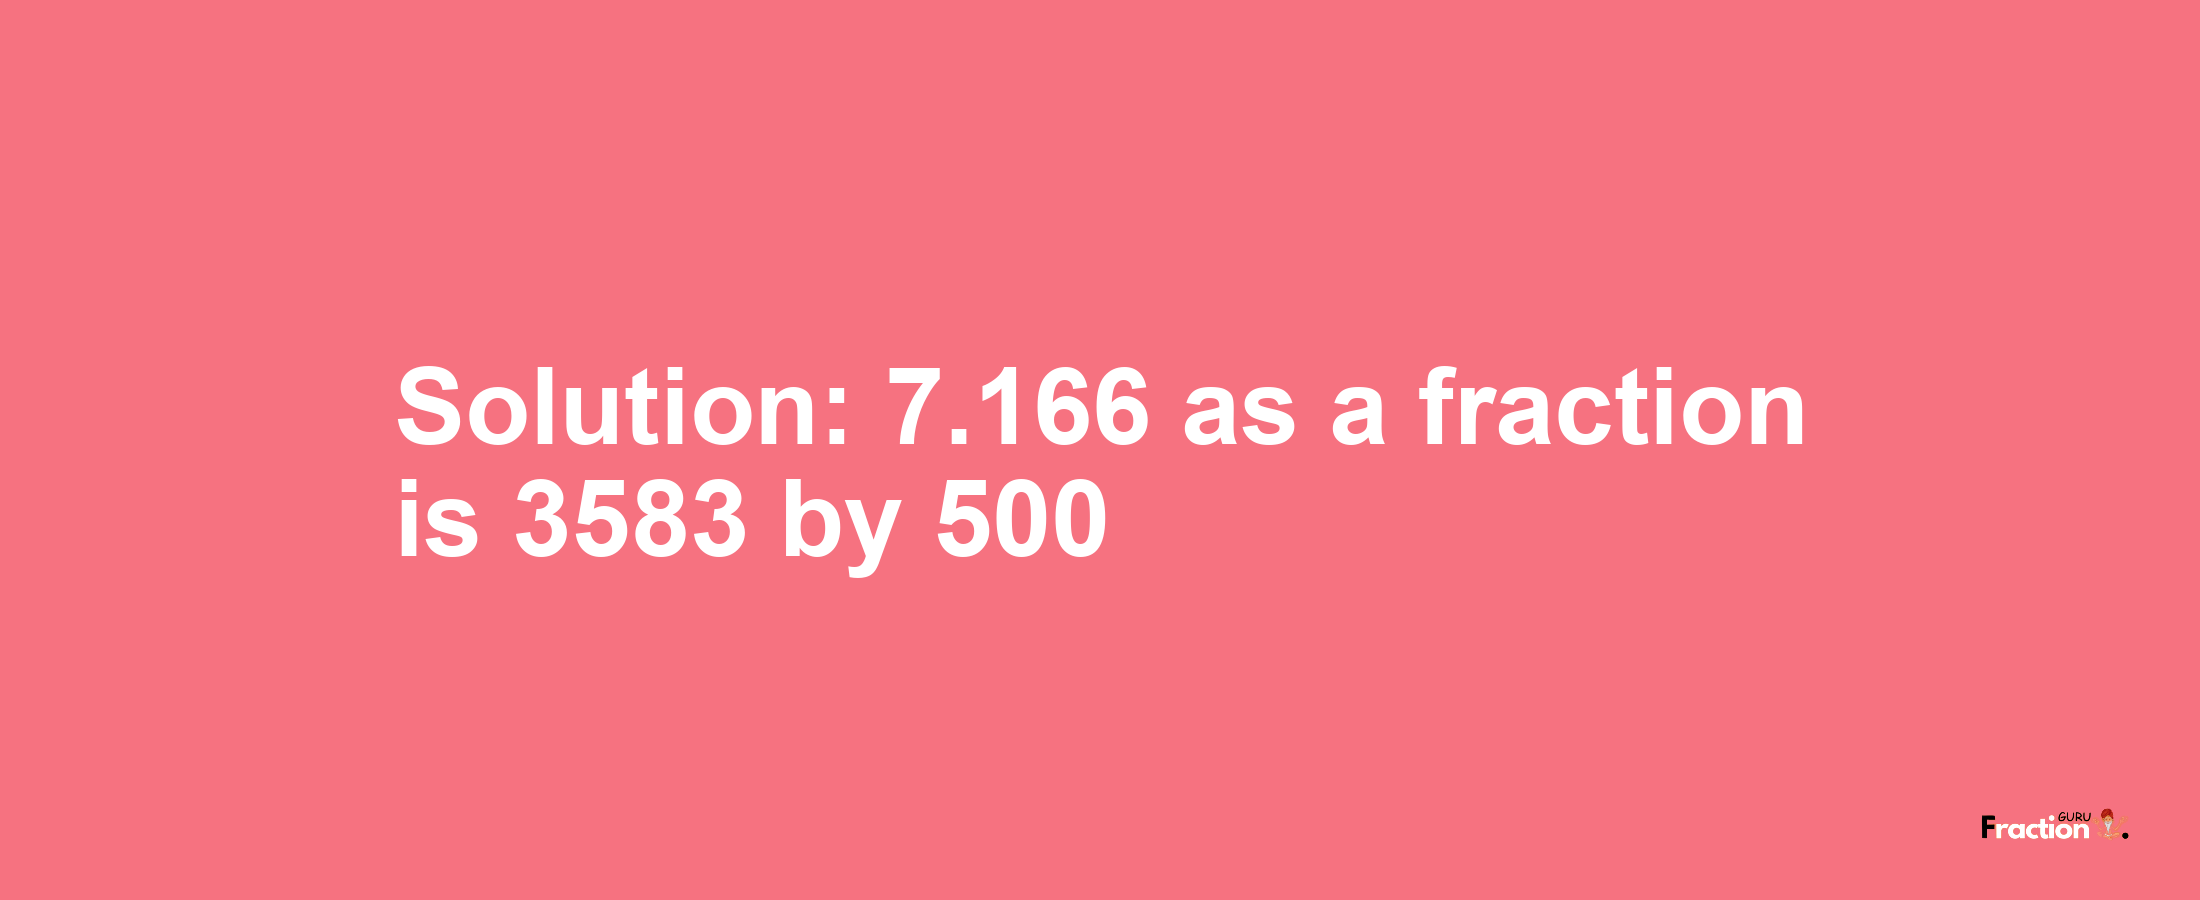 Solution:7.166 as a fraction is 3583/500